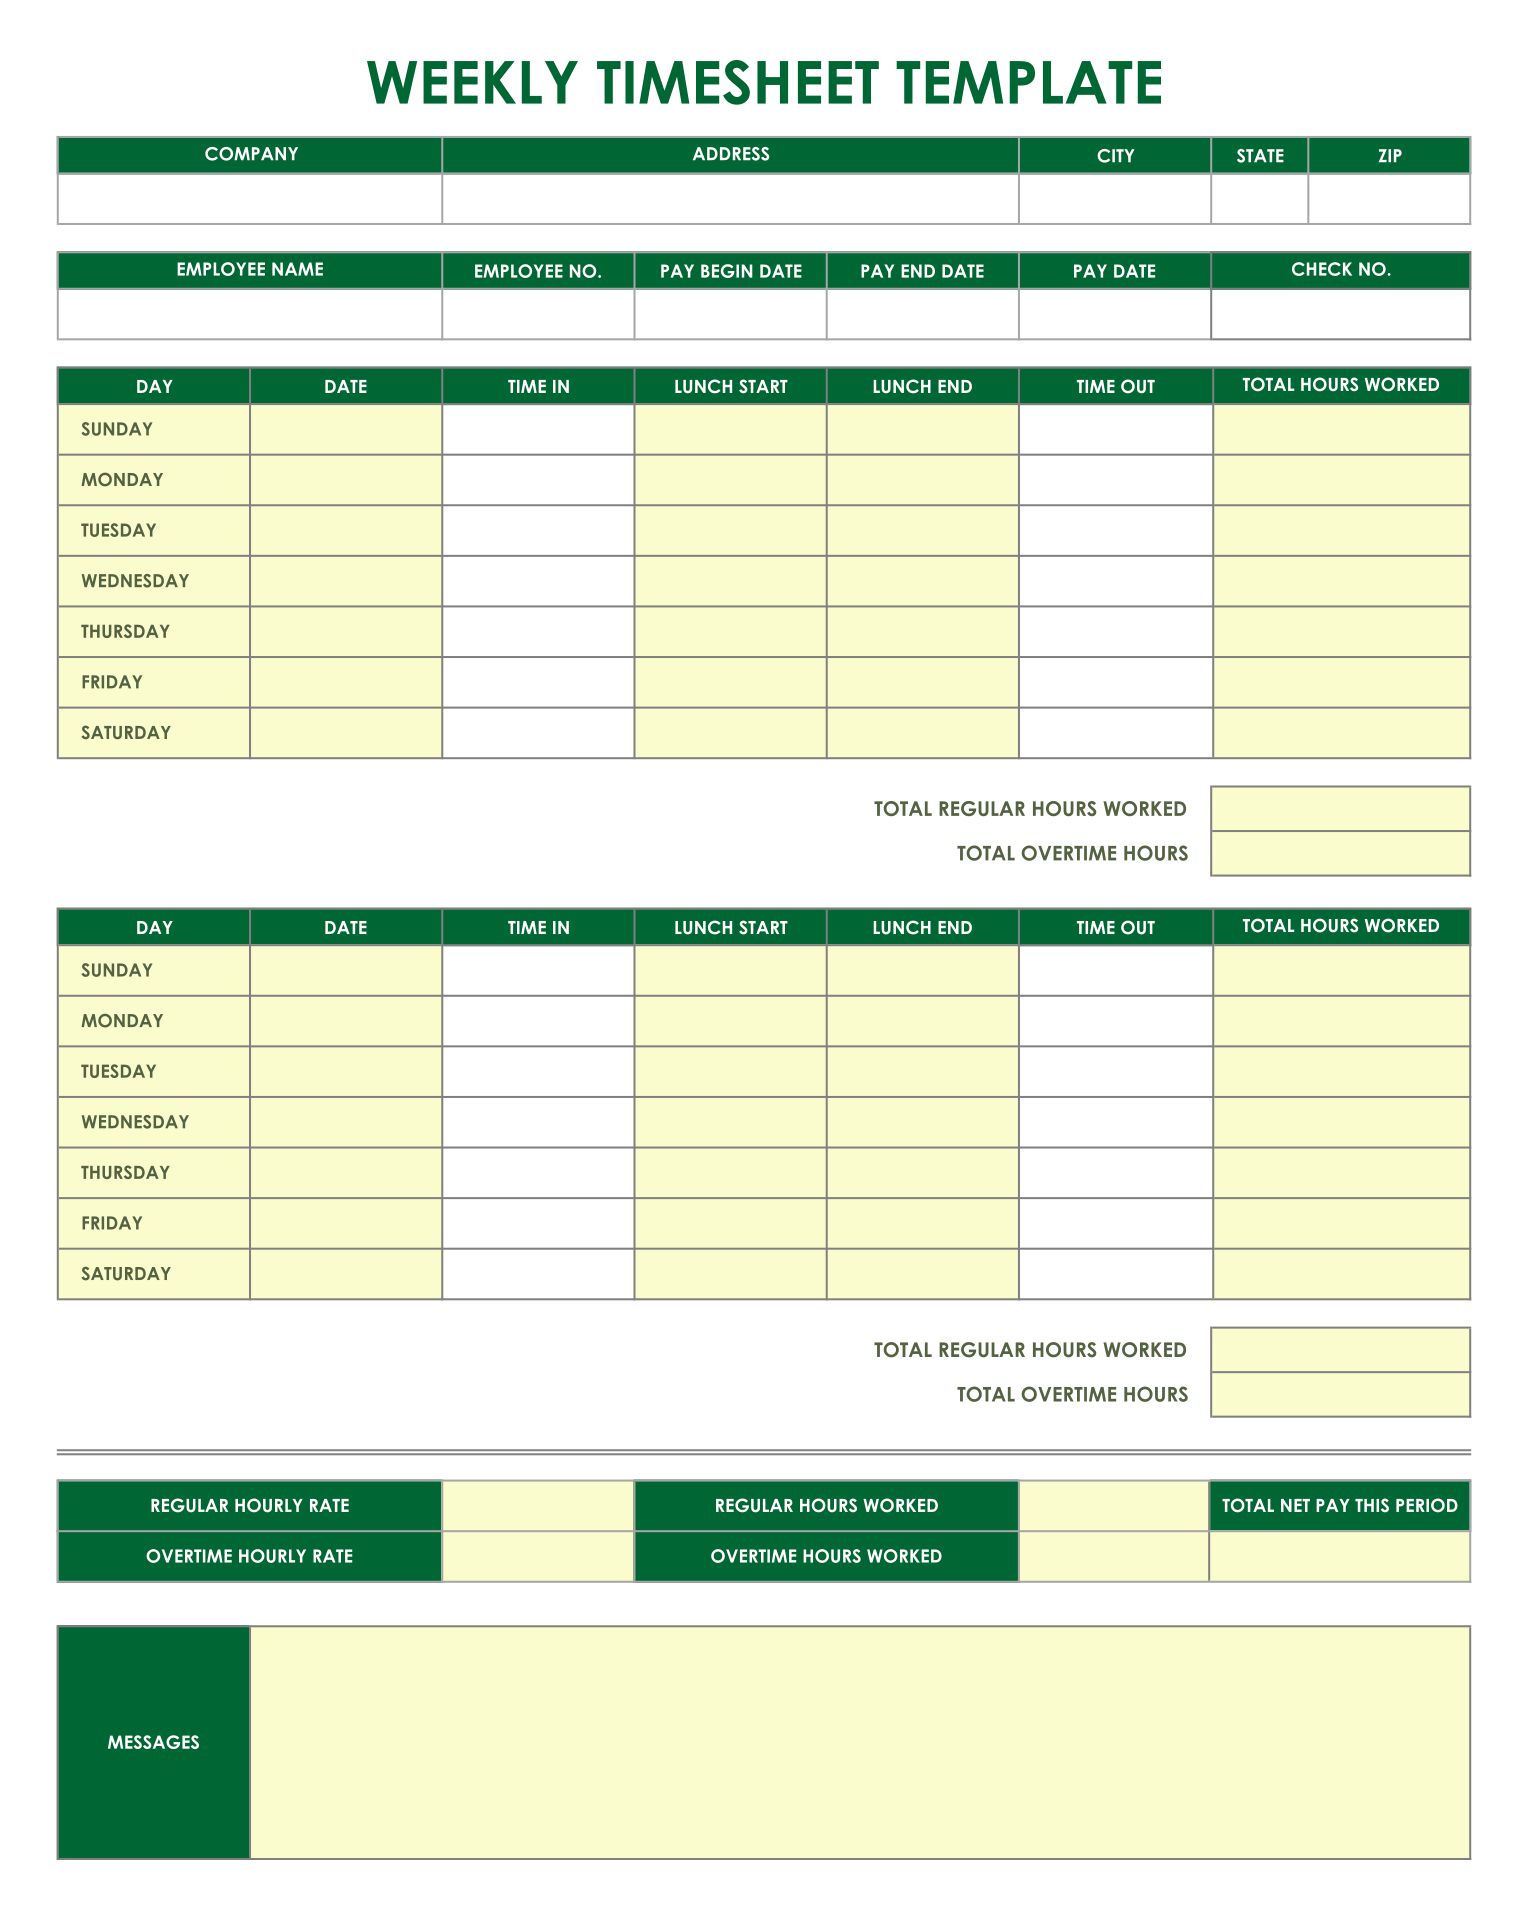 8-best-images-of-blank-printable-timesheets-free-download-weekly-askxz